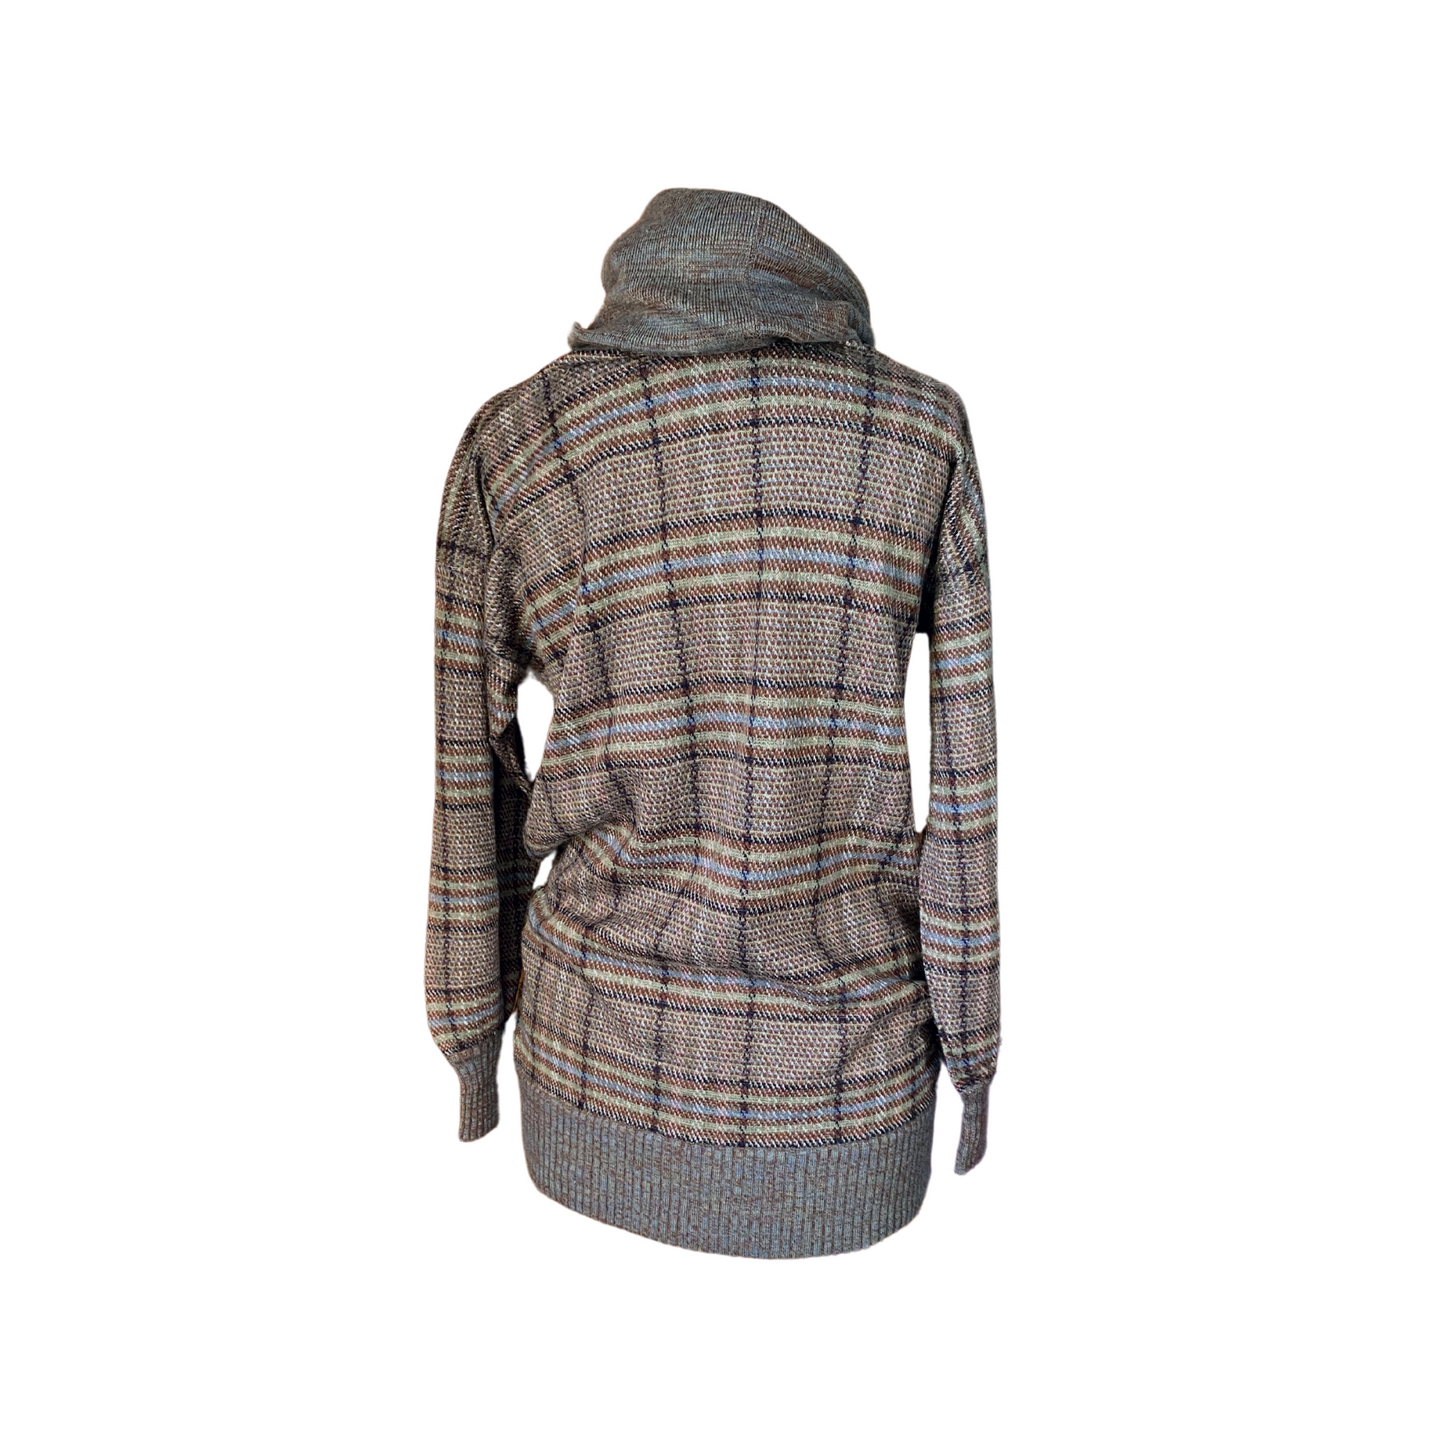 long-sleeved soft wool jumper with a unique checked and striped design in earthy tones - back view 